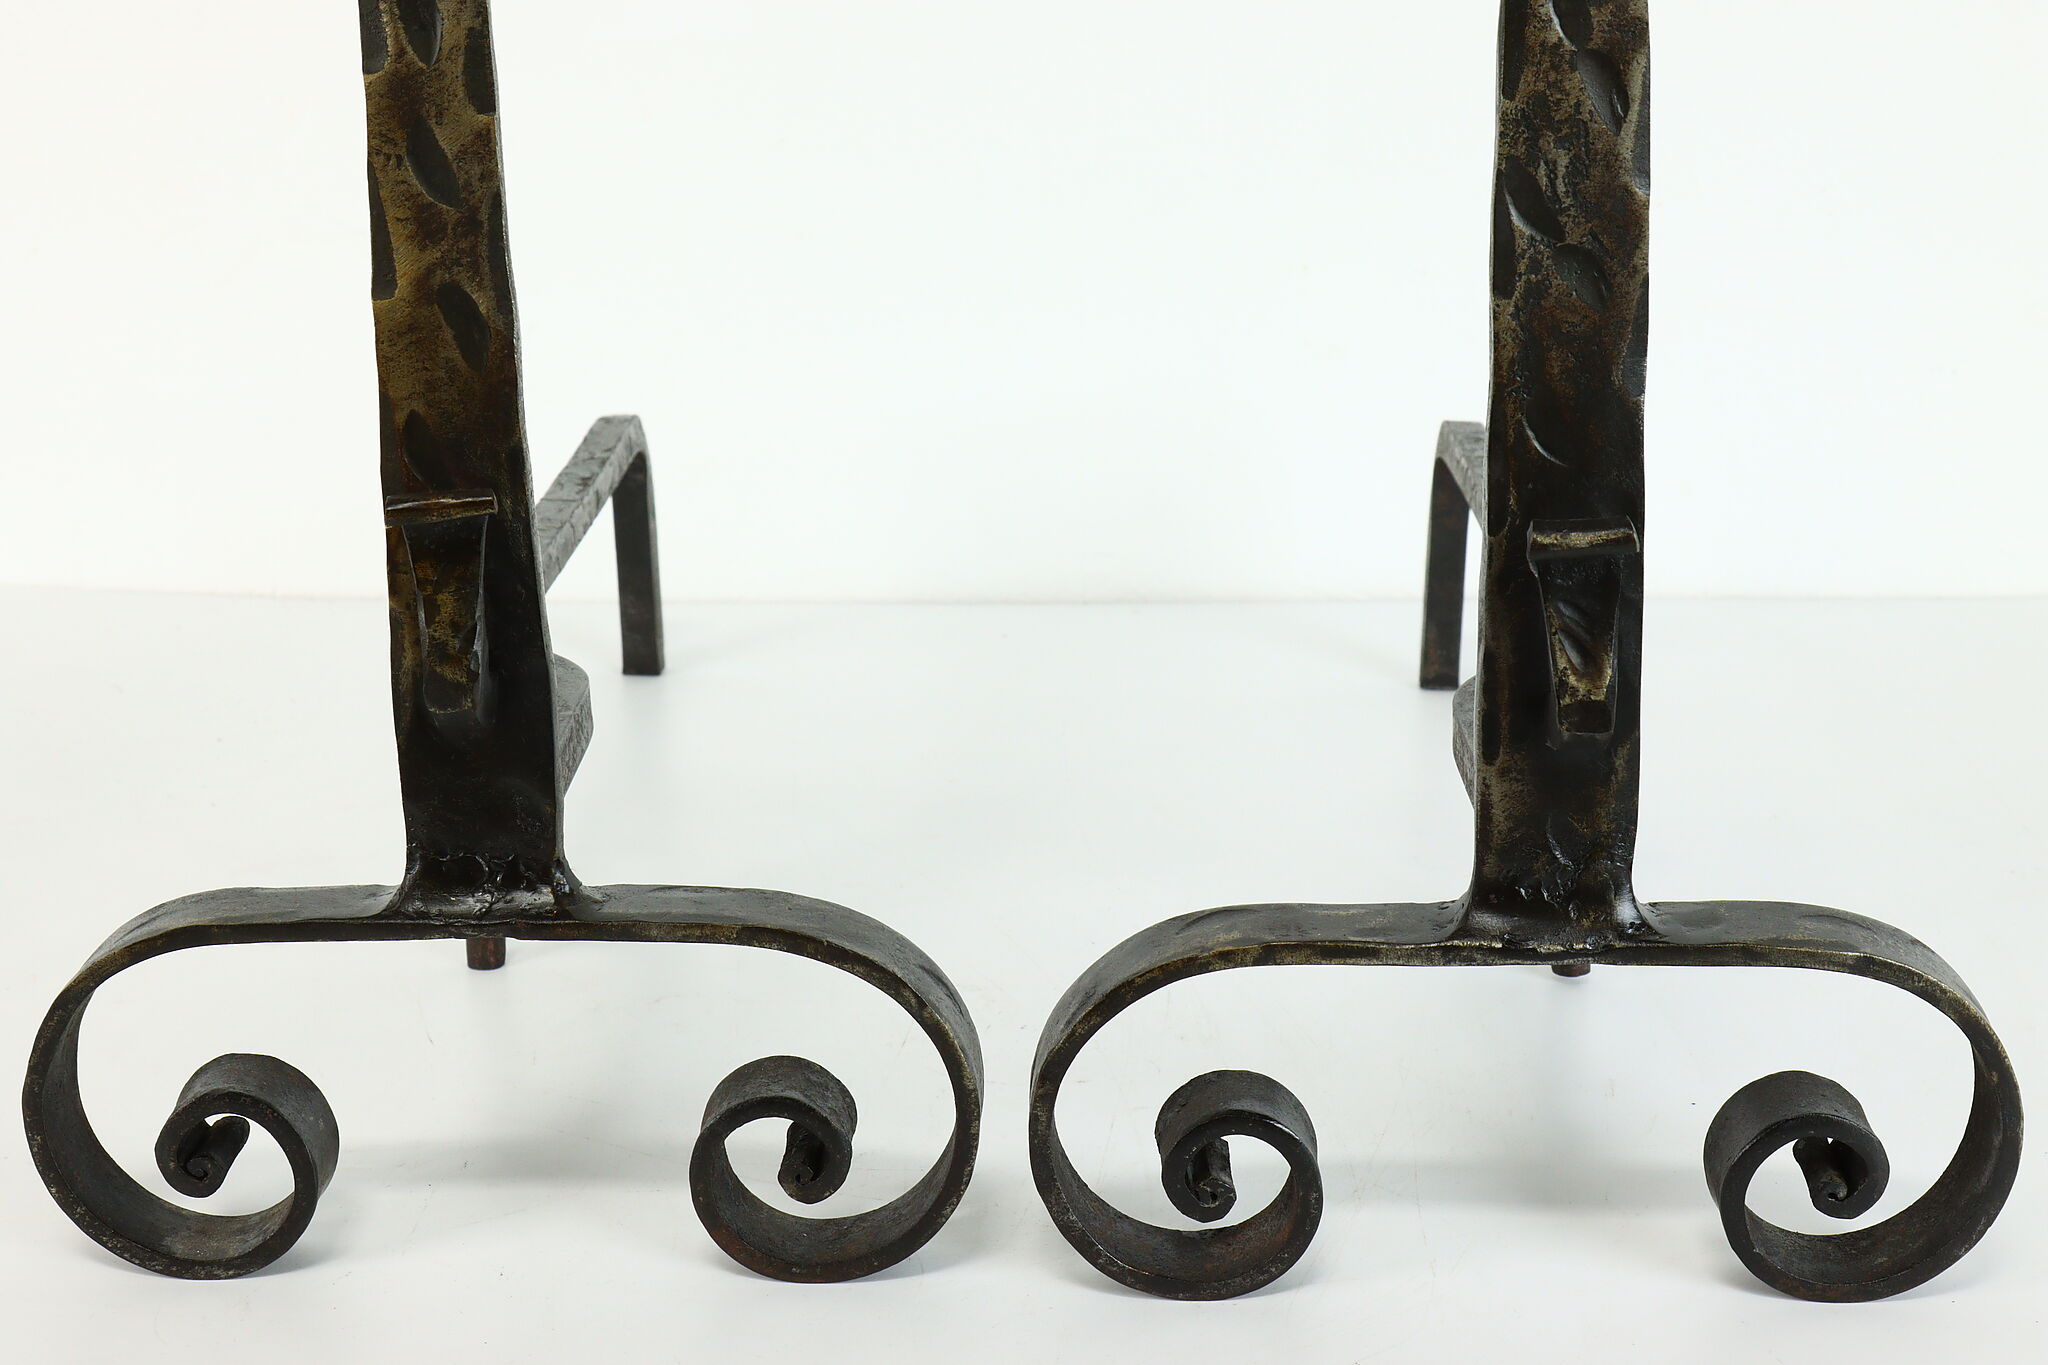 Dollhouse Miniature Harmony Forge Handcrafted Wrought Iron Charleston Andirons 